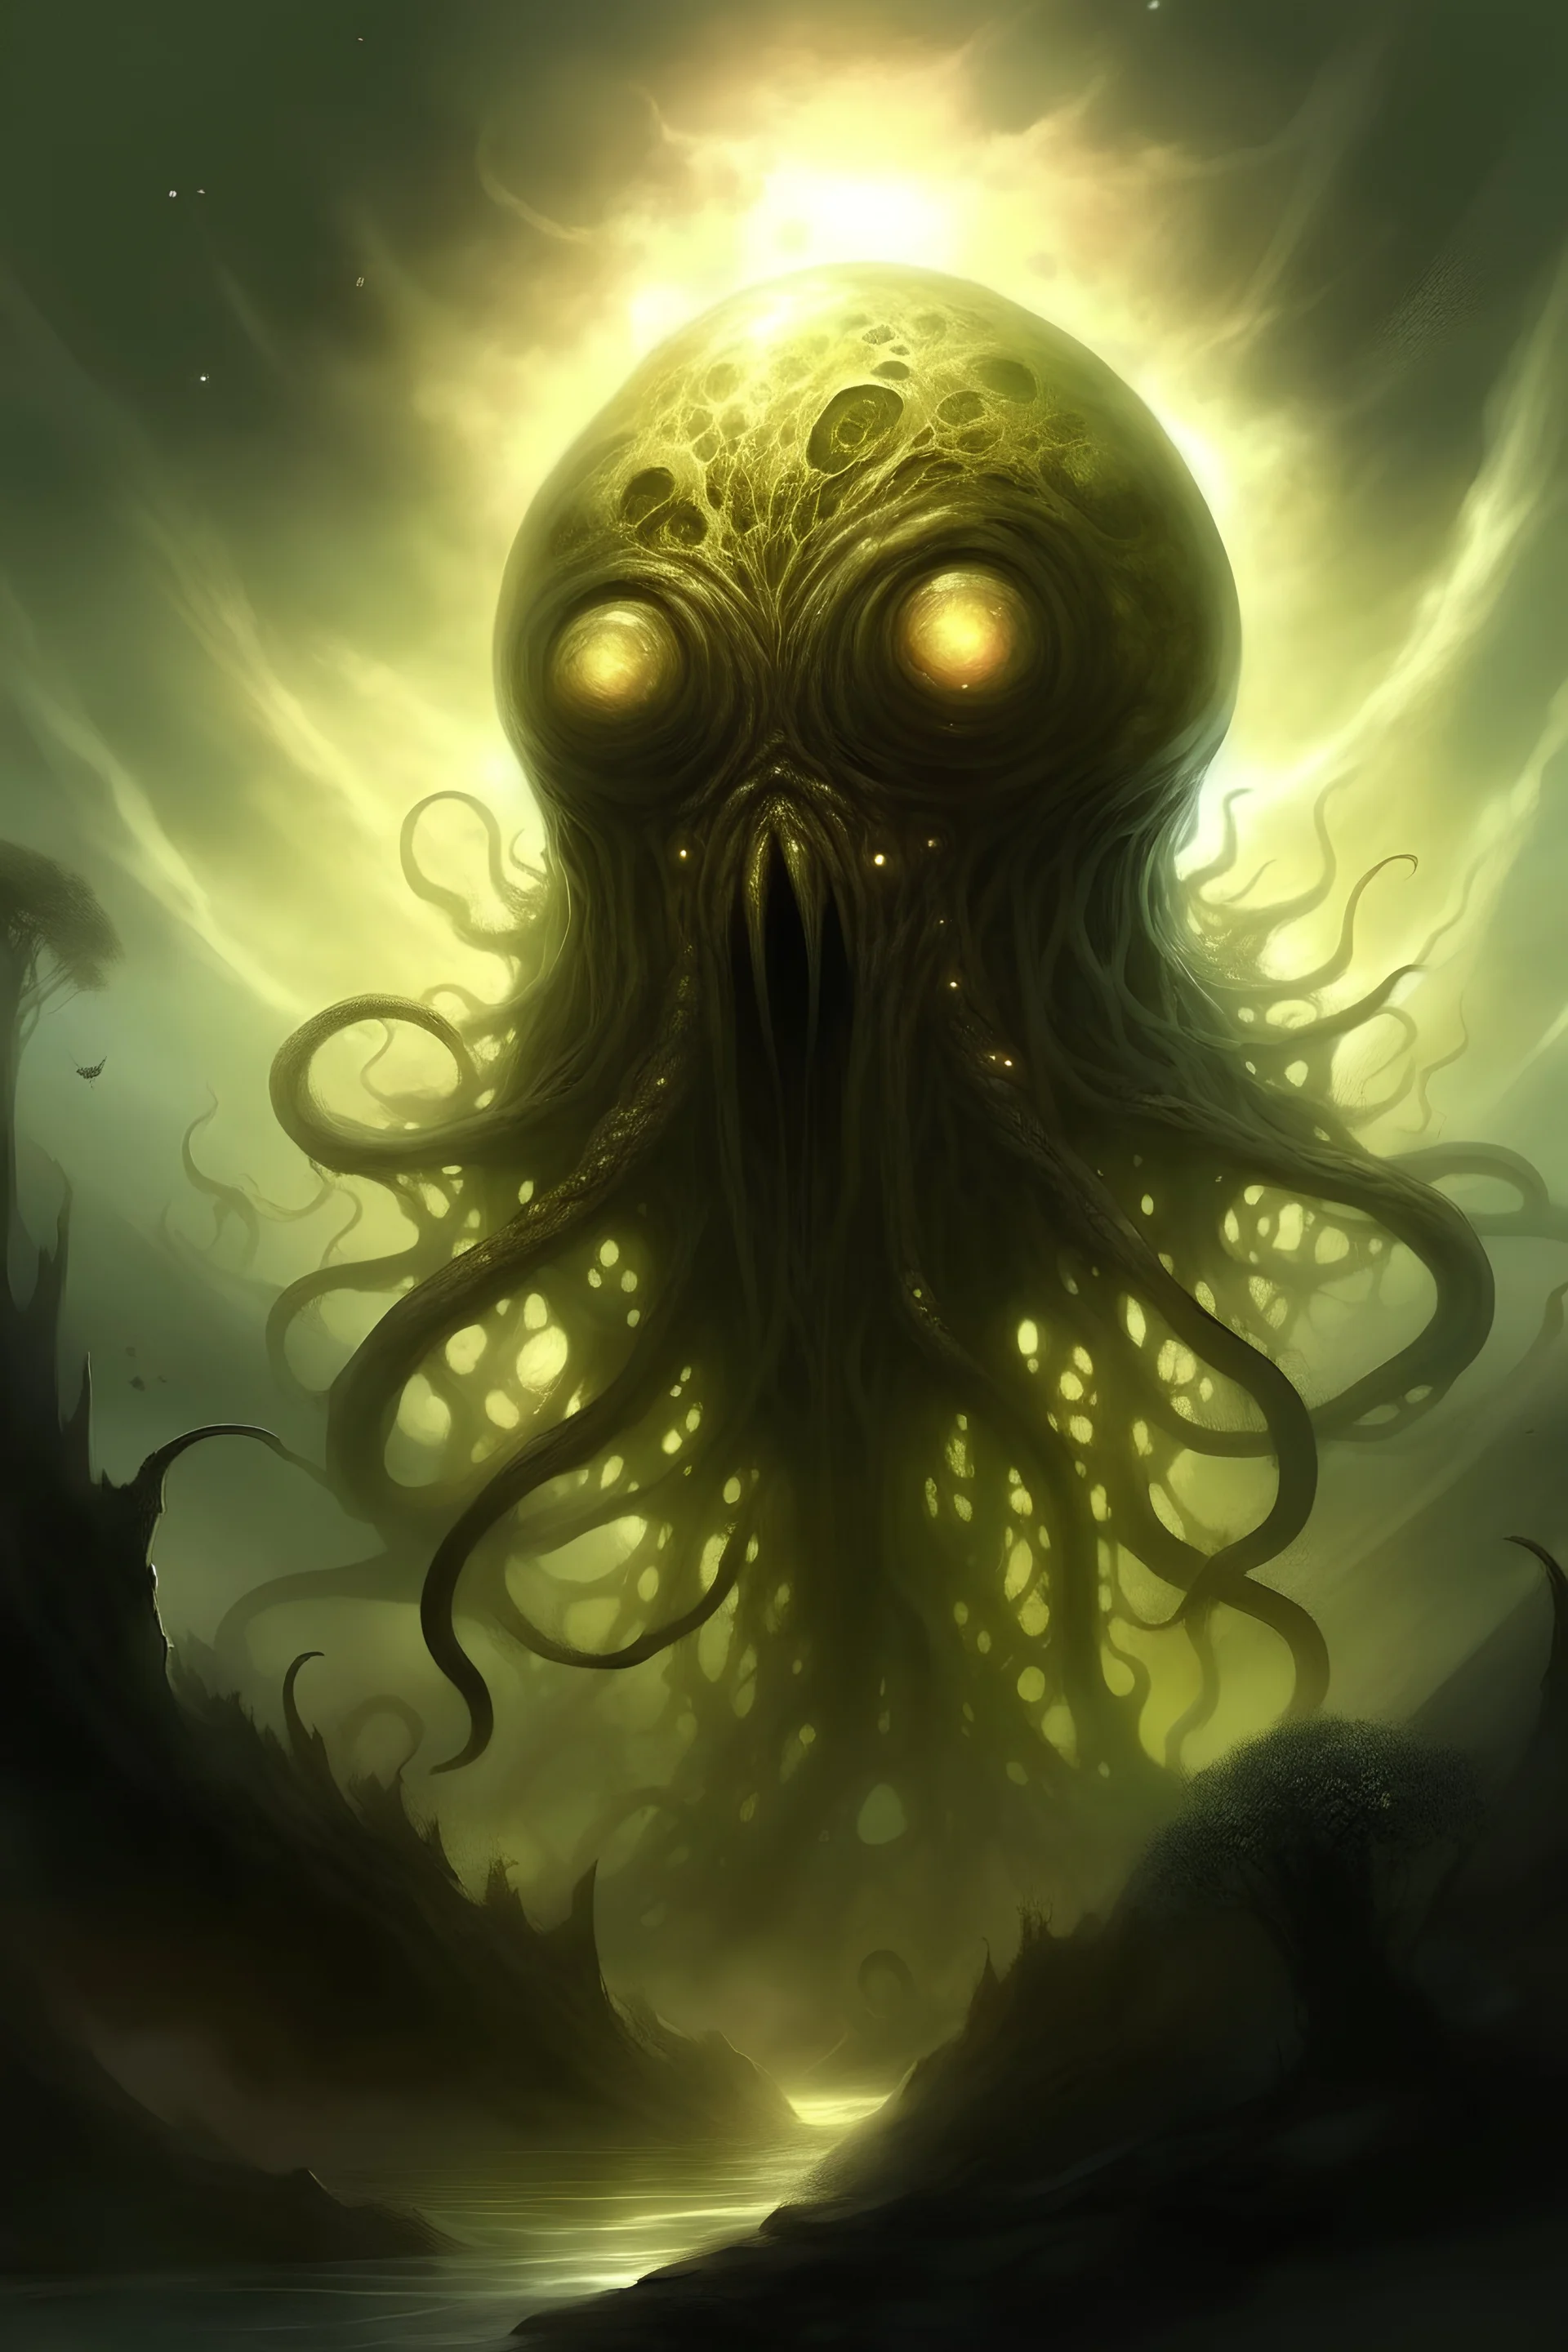 the eldritch embodiment of the morning, sun, daytime, and all seeing eyes